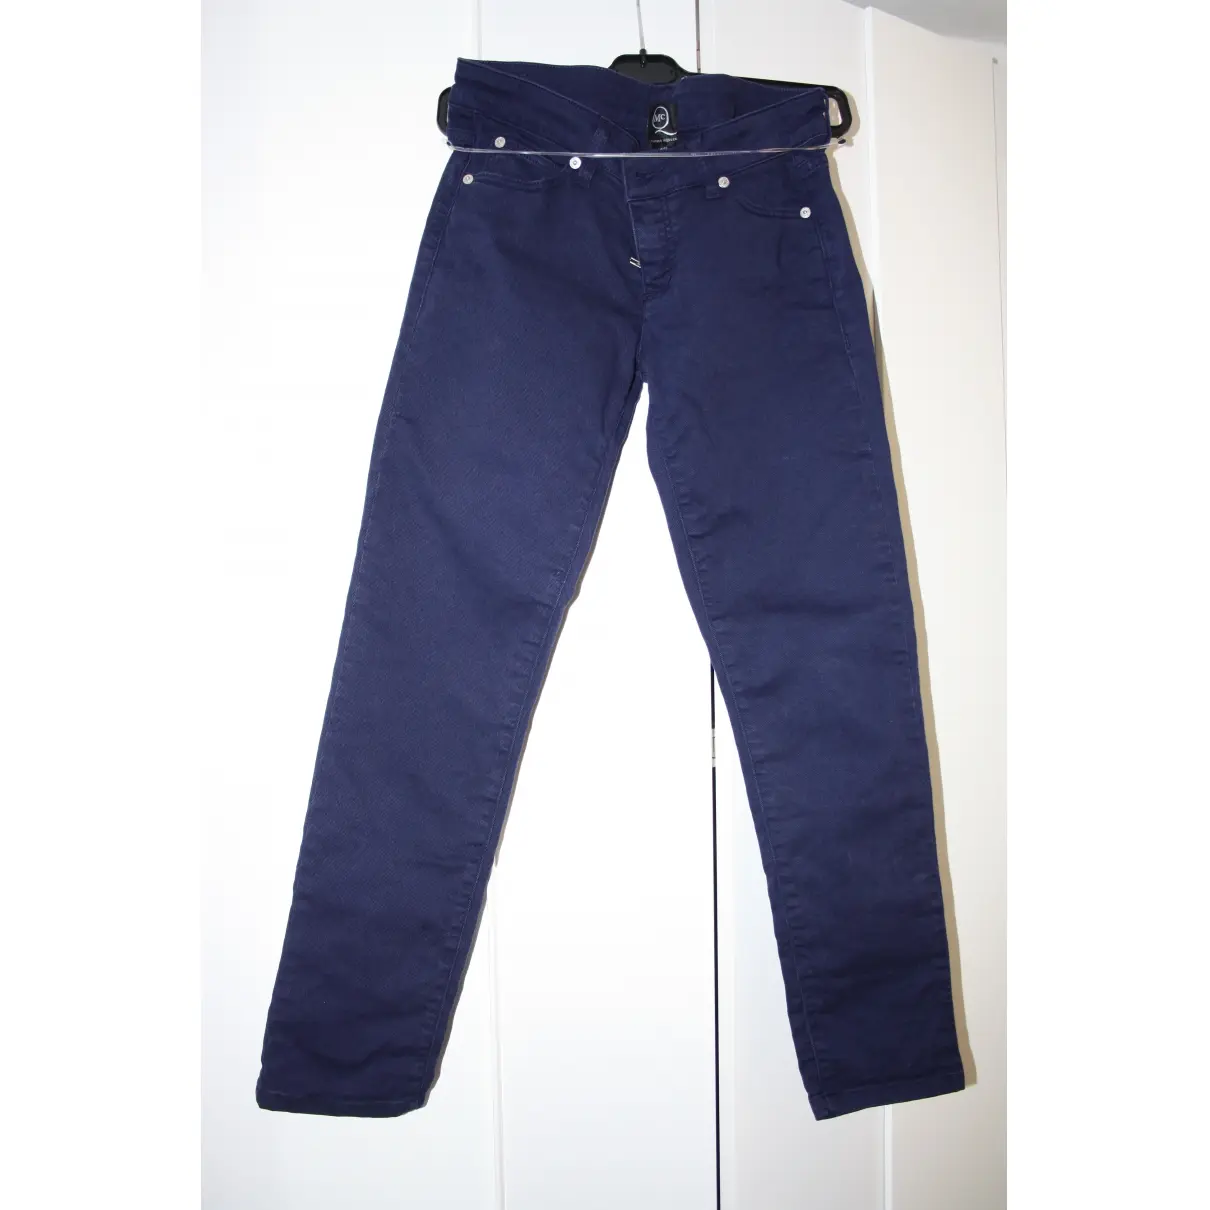 Mcq Straight jeans for sale